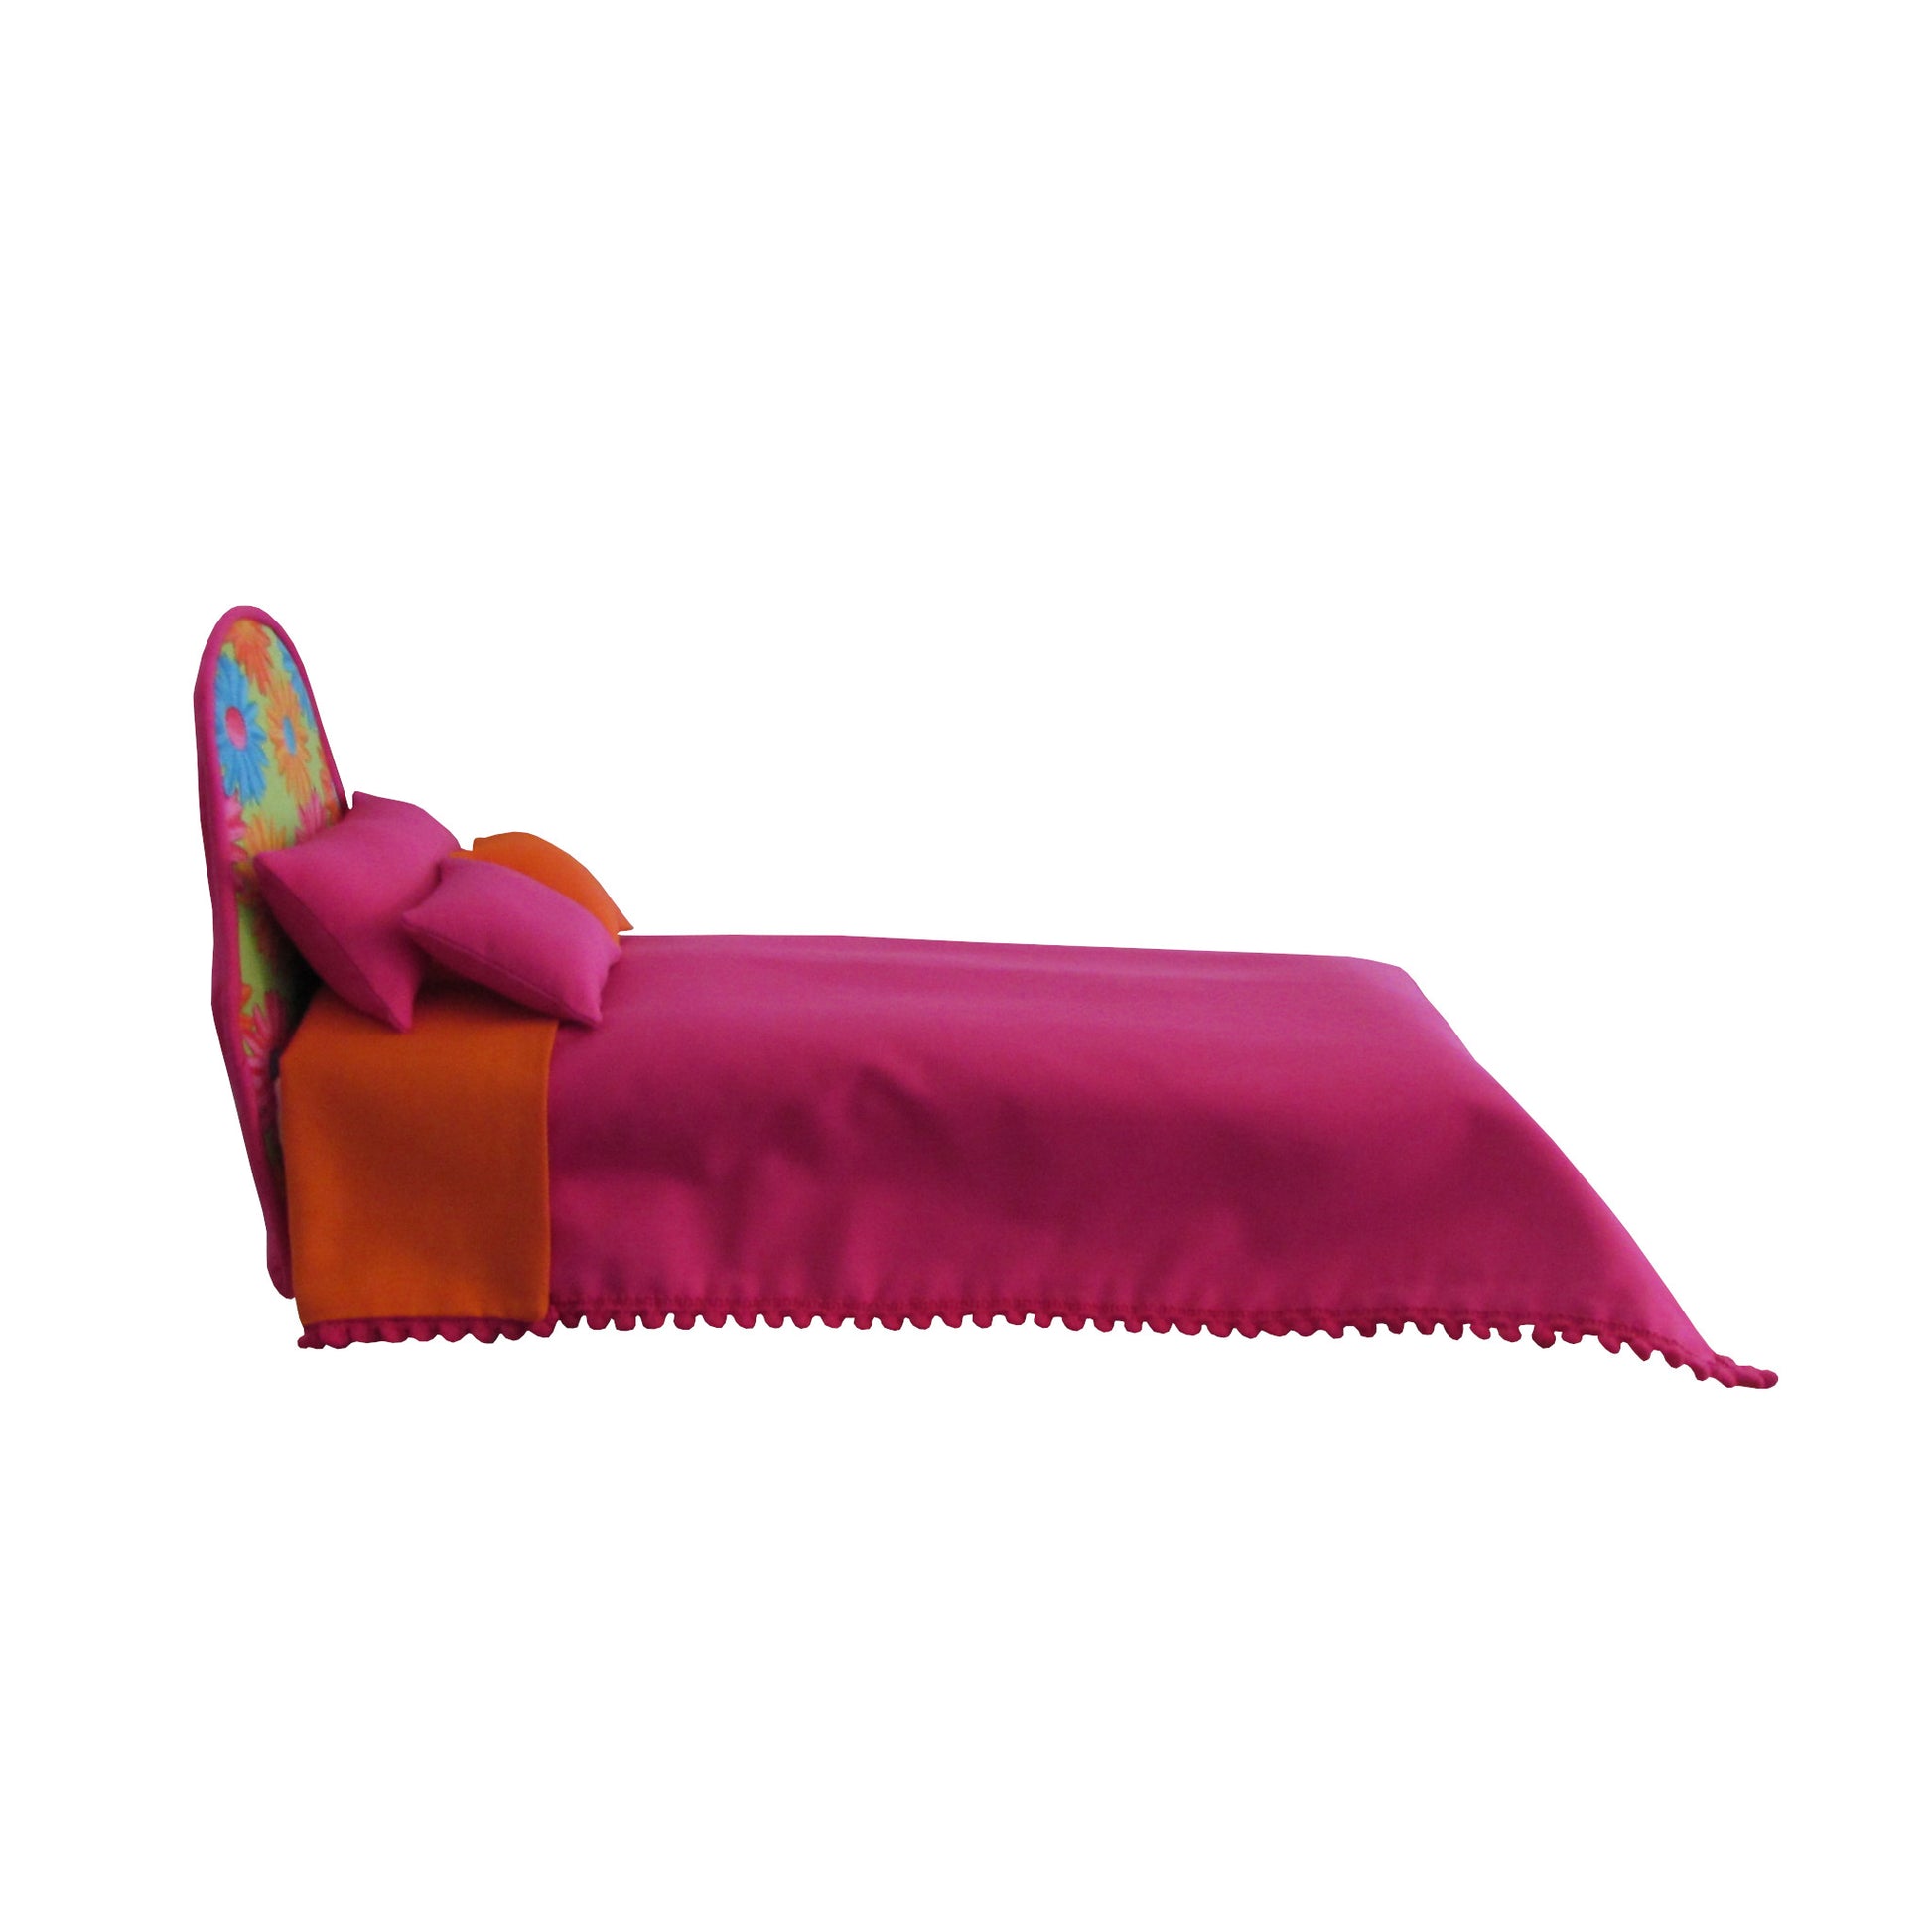 Bright Pink Doll Bed with Orange Turquoise Floral Headboard and Pink Bedding for 11.5-inch and 12-inch dolls Side view